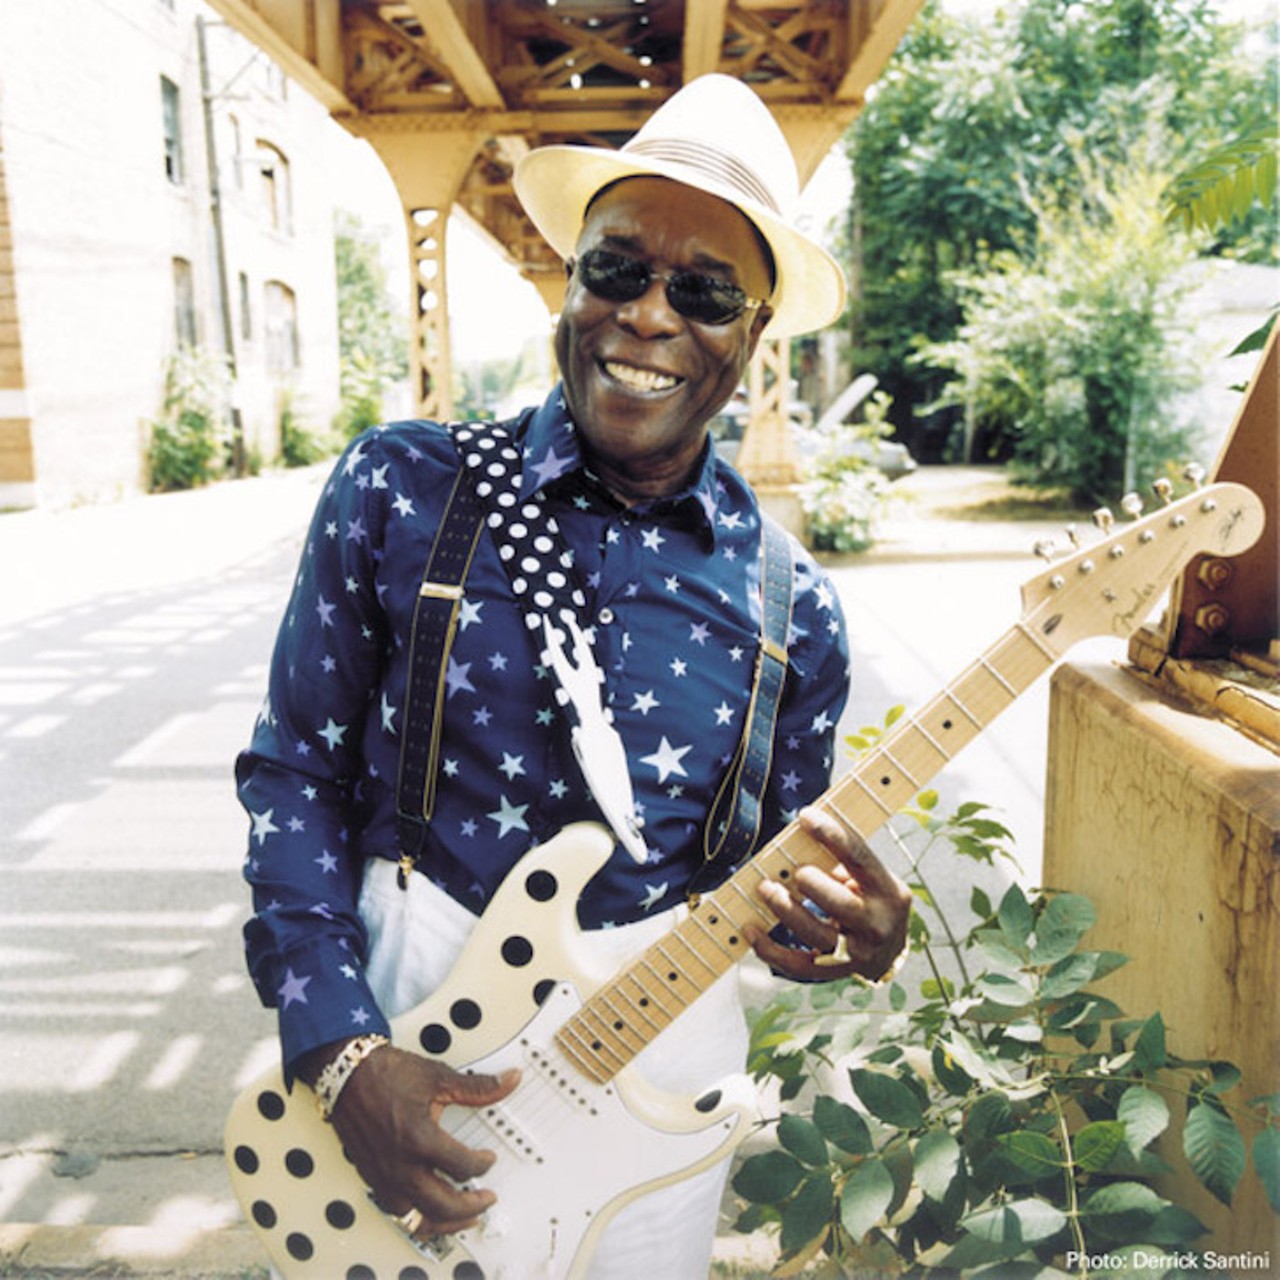 Friday, April 6
Buddy Guy Beyond-legendary Chicago blues guitarist is responsible for influencing a good deal of the rock music in your record collection., 7 p.m. at House of Blues; $39.50 ; 407-934-2583
Photo via Buddy Guy's website